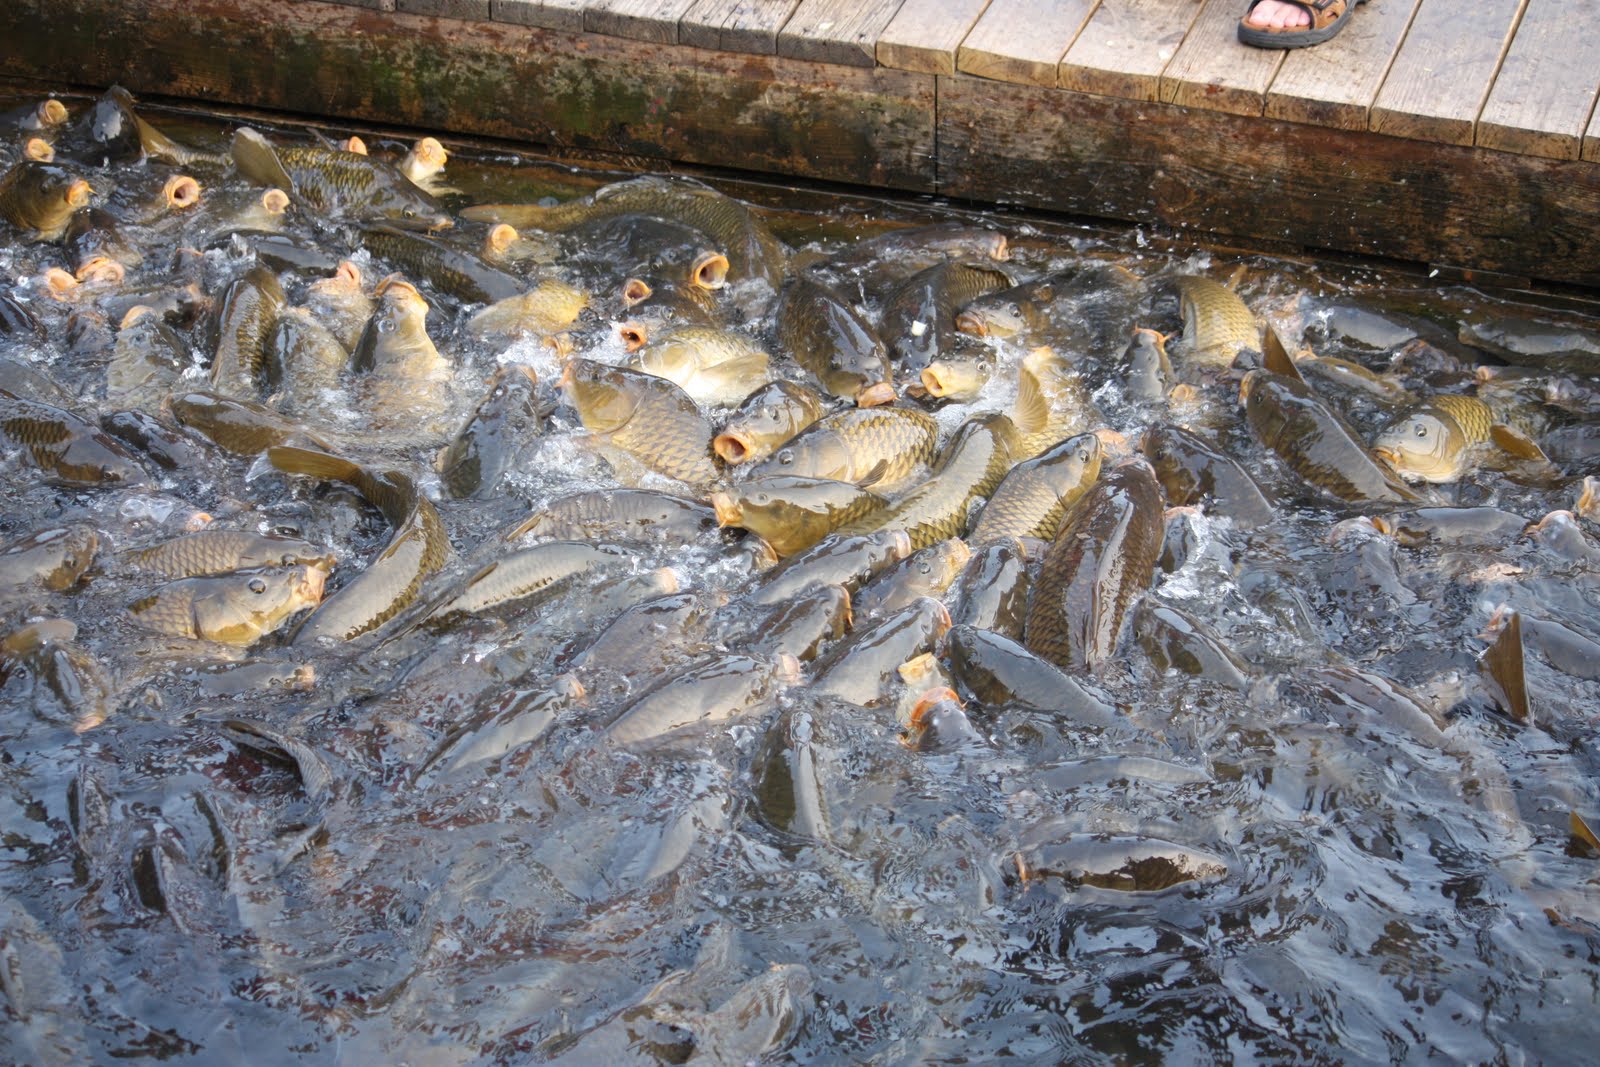 What to feed fish in a pond? Developing a feeding program for your